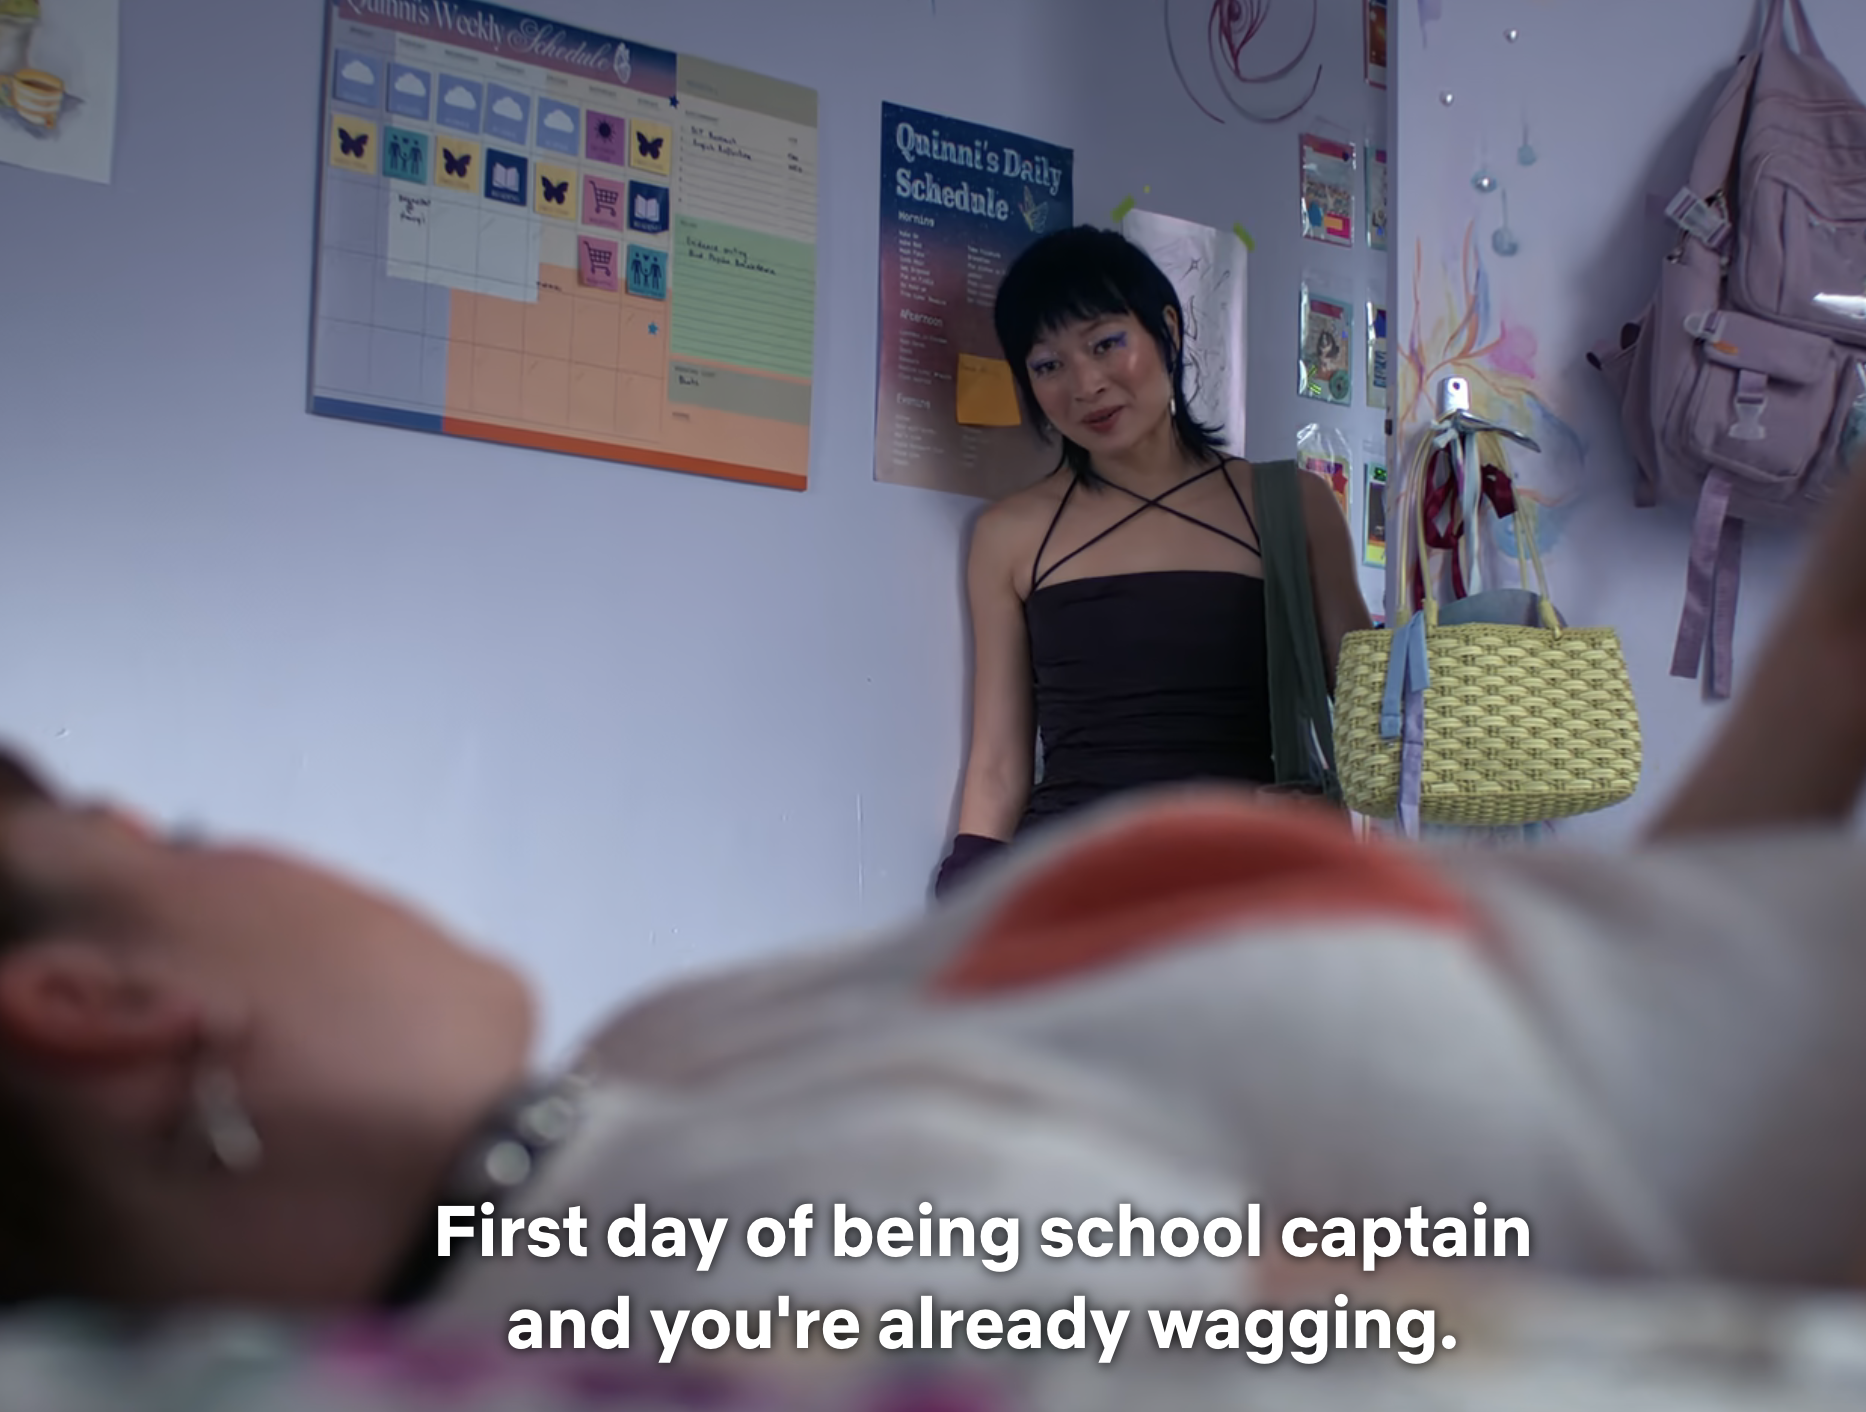 Person in school uniform lies on bed; another person with black hair, black top, and skirt stands nearby. Dialogue from TV show on screen